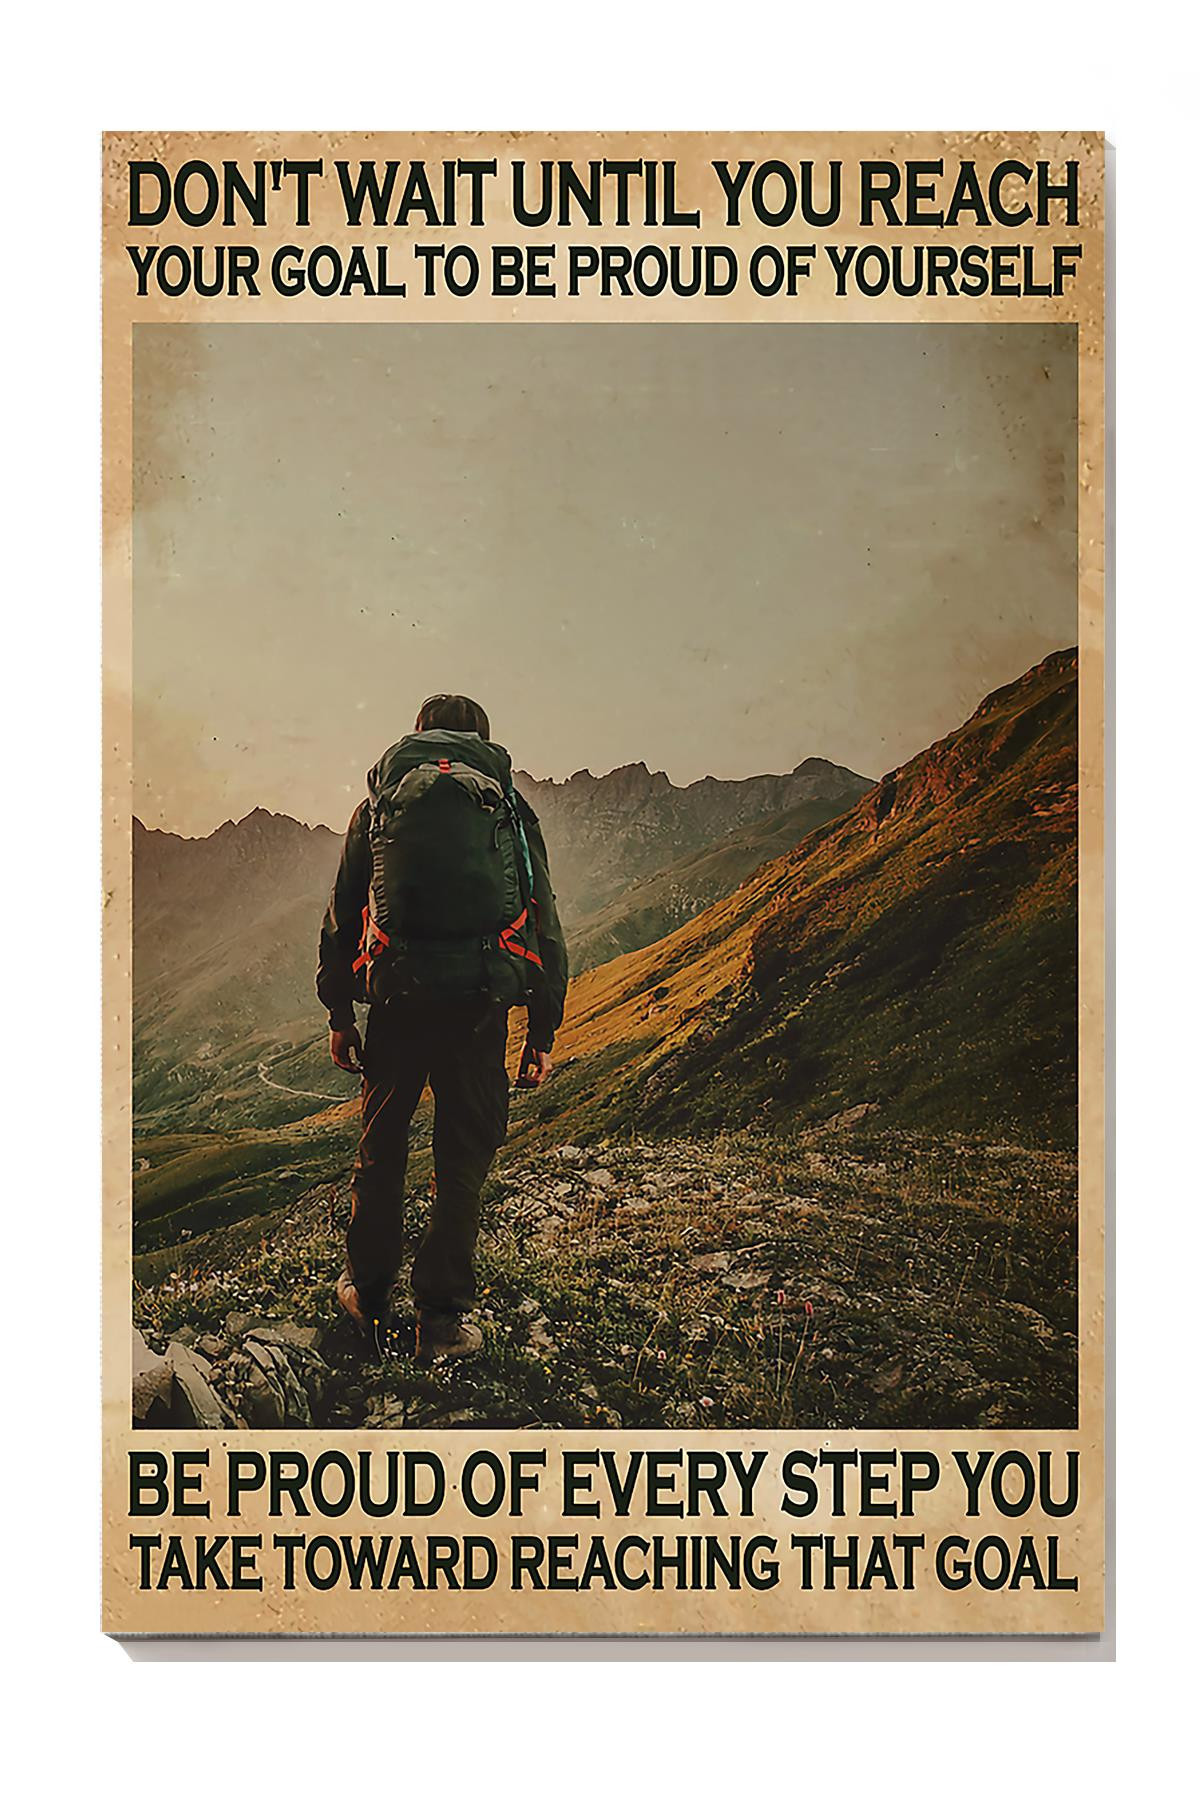 Your Goal To Be Proud Of Yourself Motivation Quote Gallery Canvas Painting For Mountain Climber Canvas Gallery Painting Wrapped Canvas Framed Prints, Canvas Paintings Wrapped Canvas 8x10